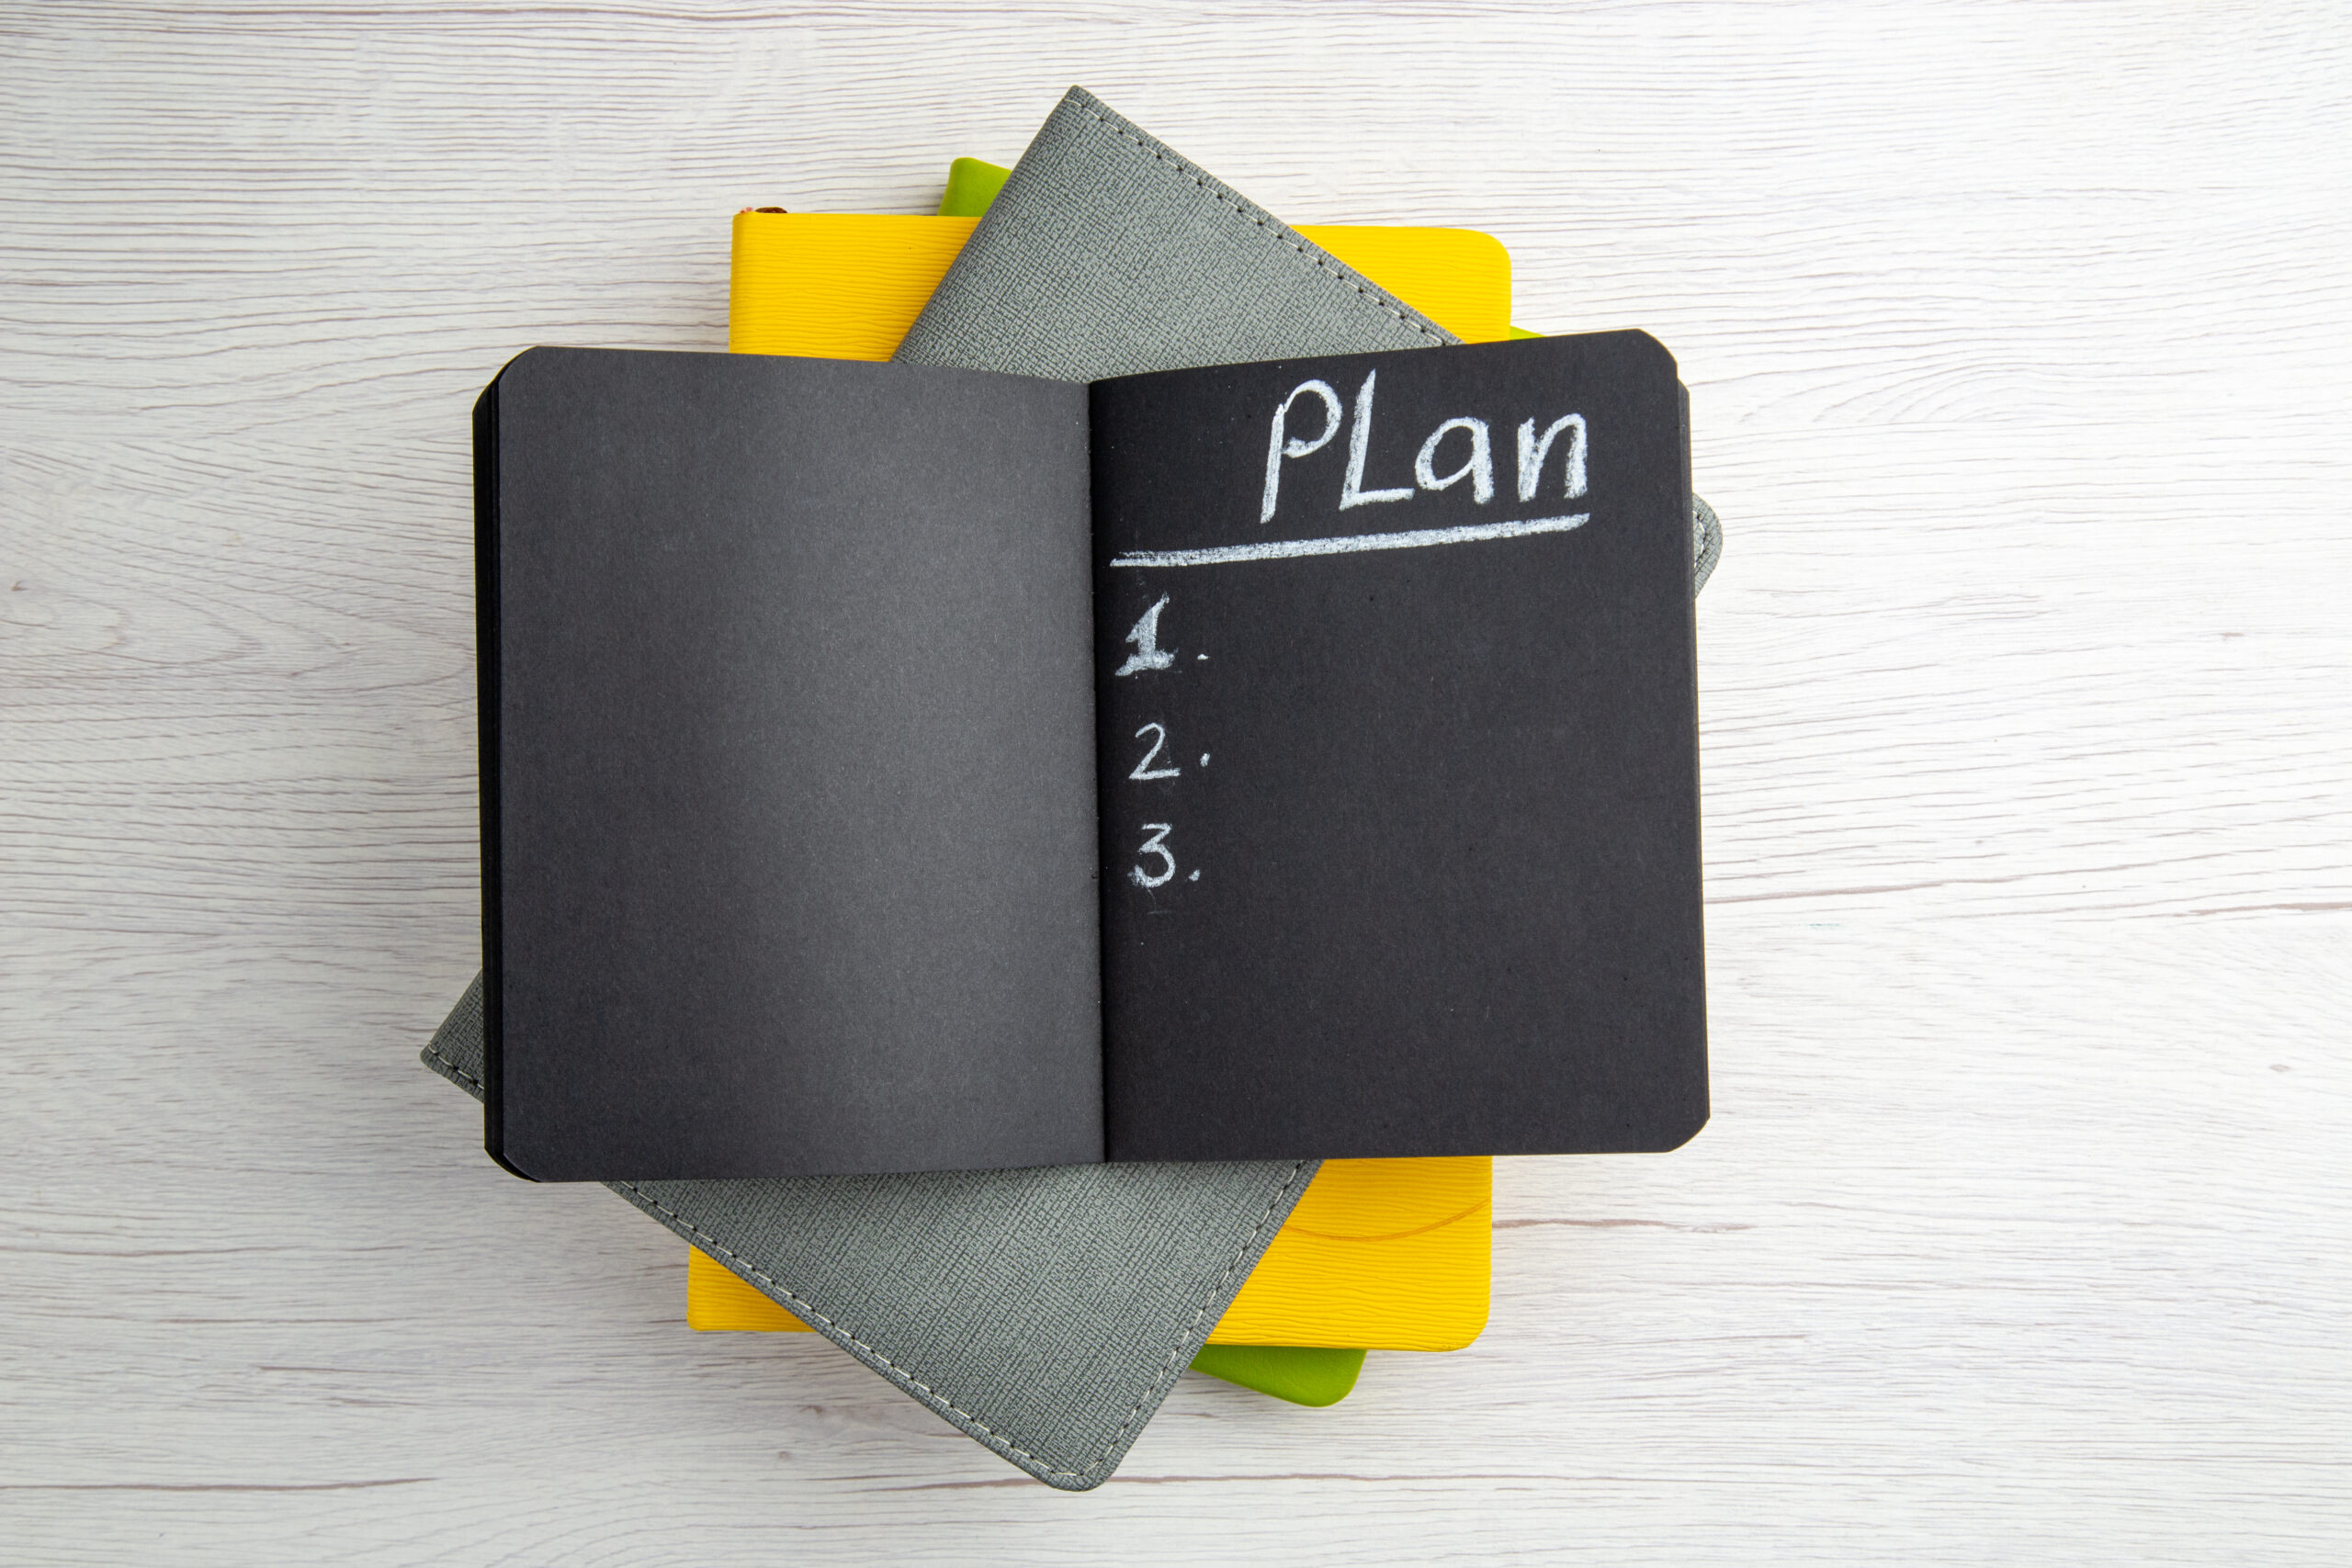 An open black notebook lies on top of a stack of closed notebooks with grey, green, and yellow covers, arranged on a light wood surface. The black notebook has the word "Plan" written at the top of the right-hand page in white chalk or chalk-like writing, followed by a numbered list with three items, all currently blank. The overall scene suggests planning or organizing tasks.